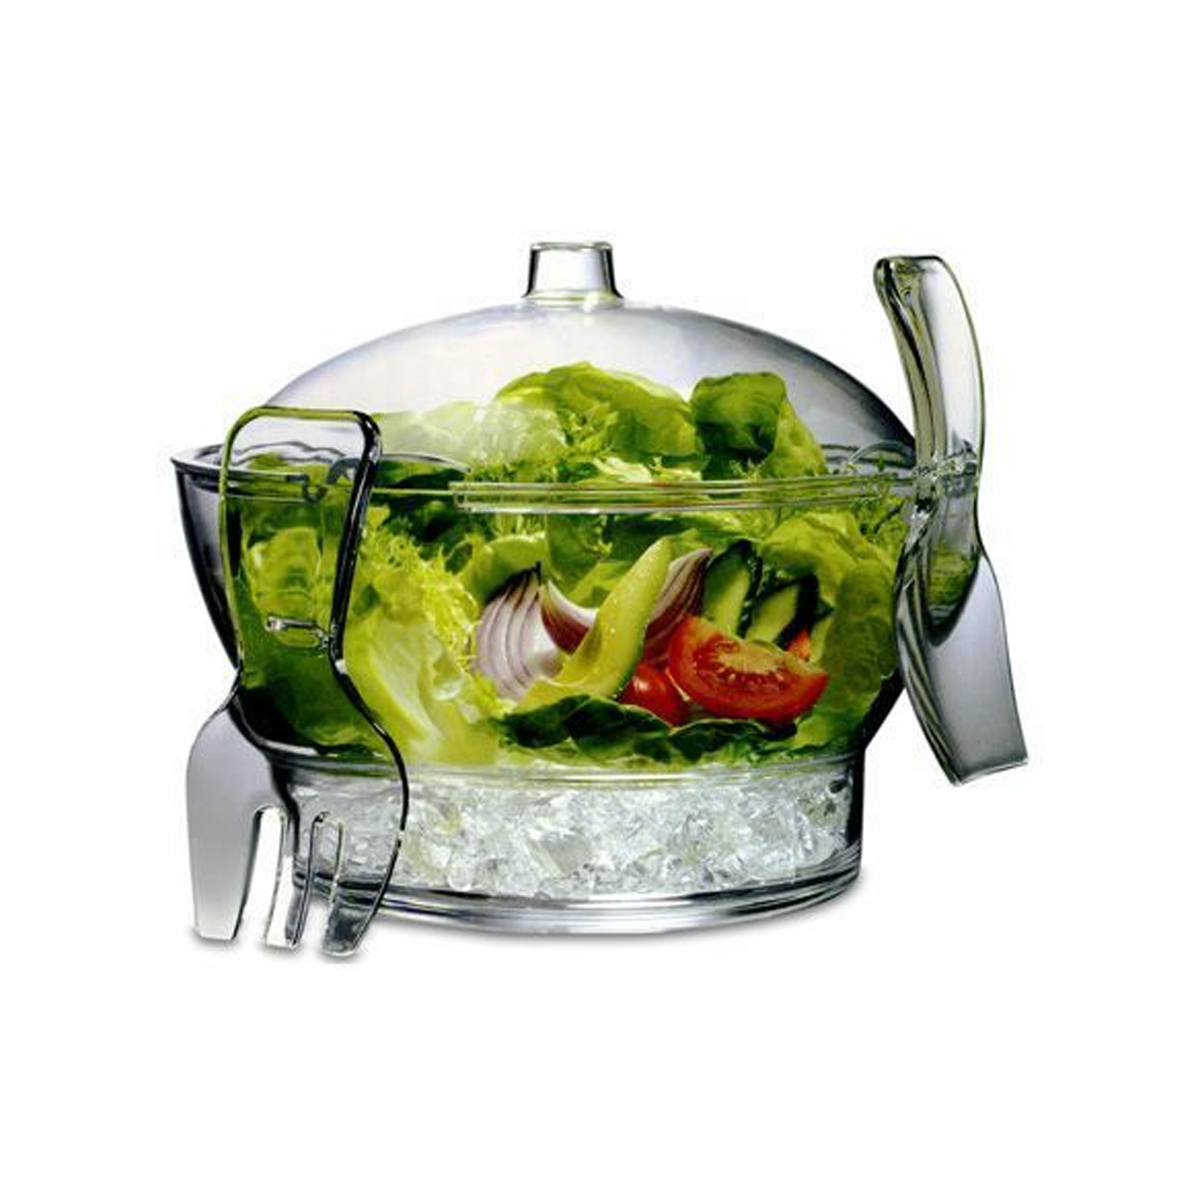 Acrylic Ice Salad Bowl with Vented Ice Chamber for Fruit and Vegetable - SquareDubai